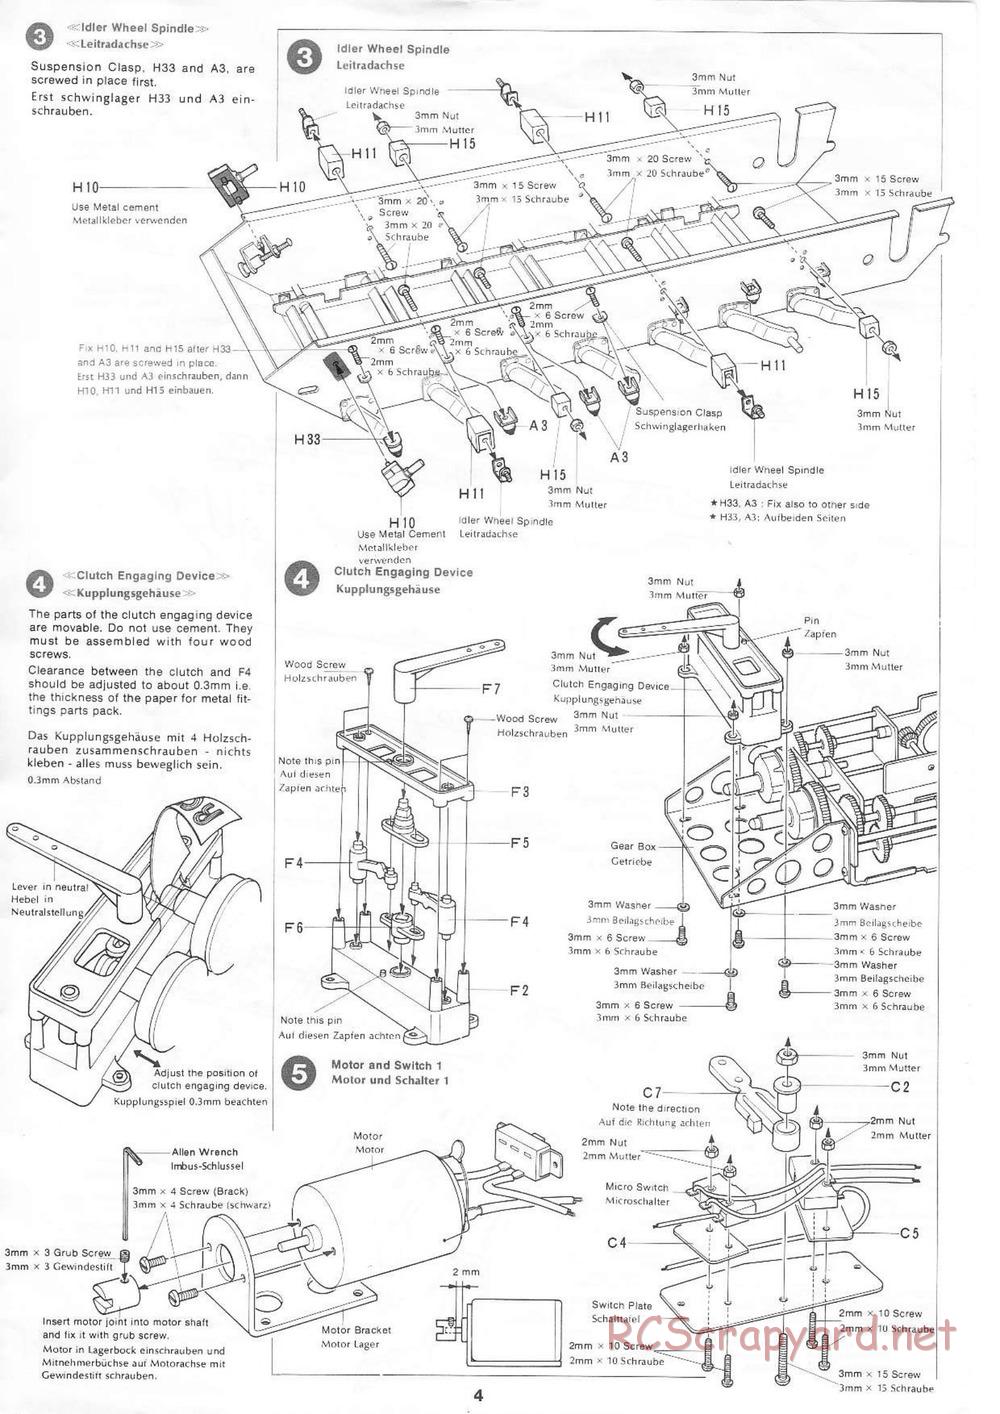 Tamiya - Leopard A4 - 1/16 Scale Chassis - Manual - Page 4